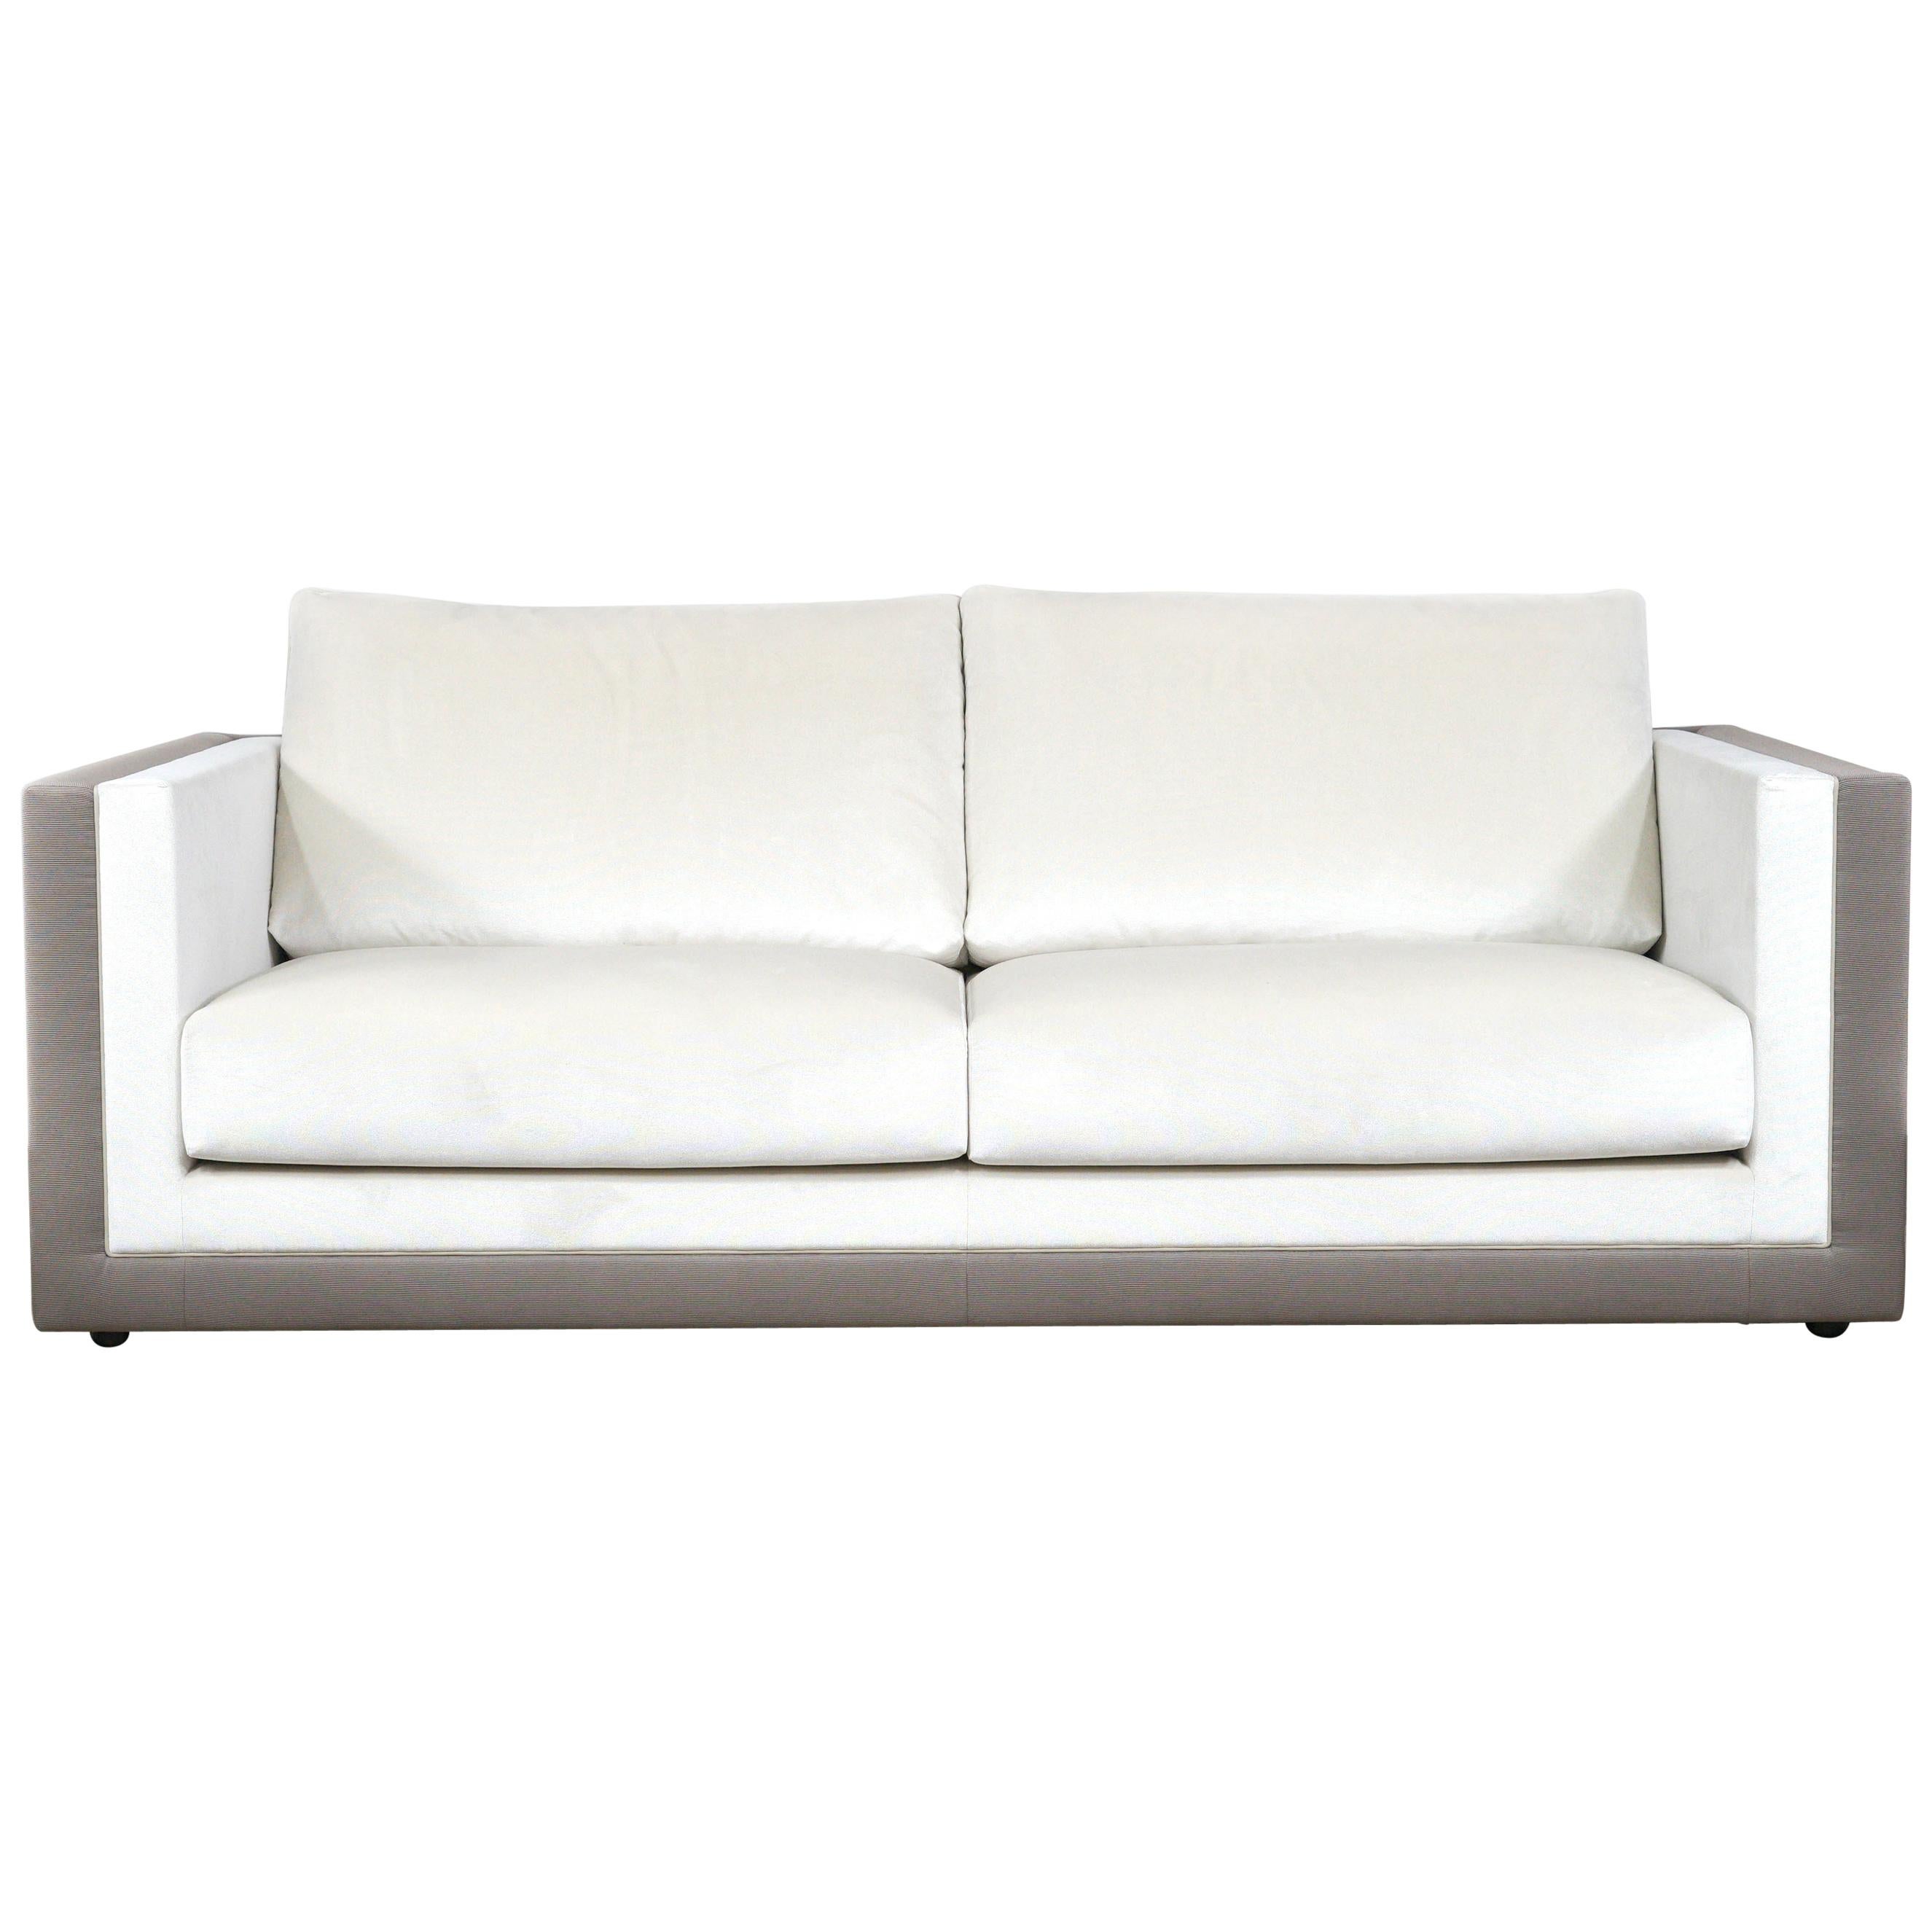 Heritage Collection Tancredi 3-Seat Sofa For Sale